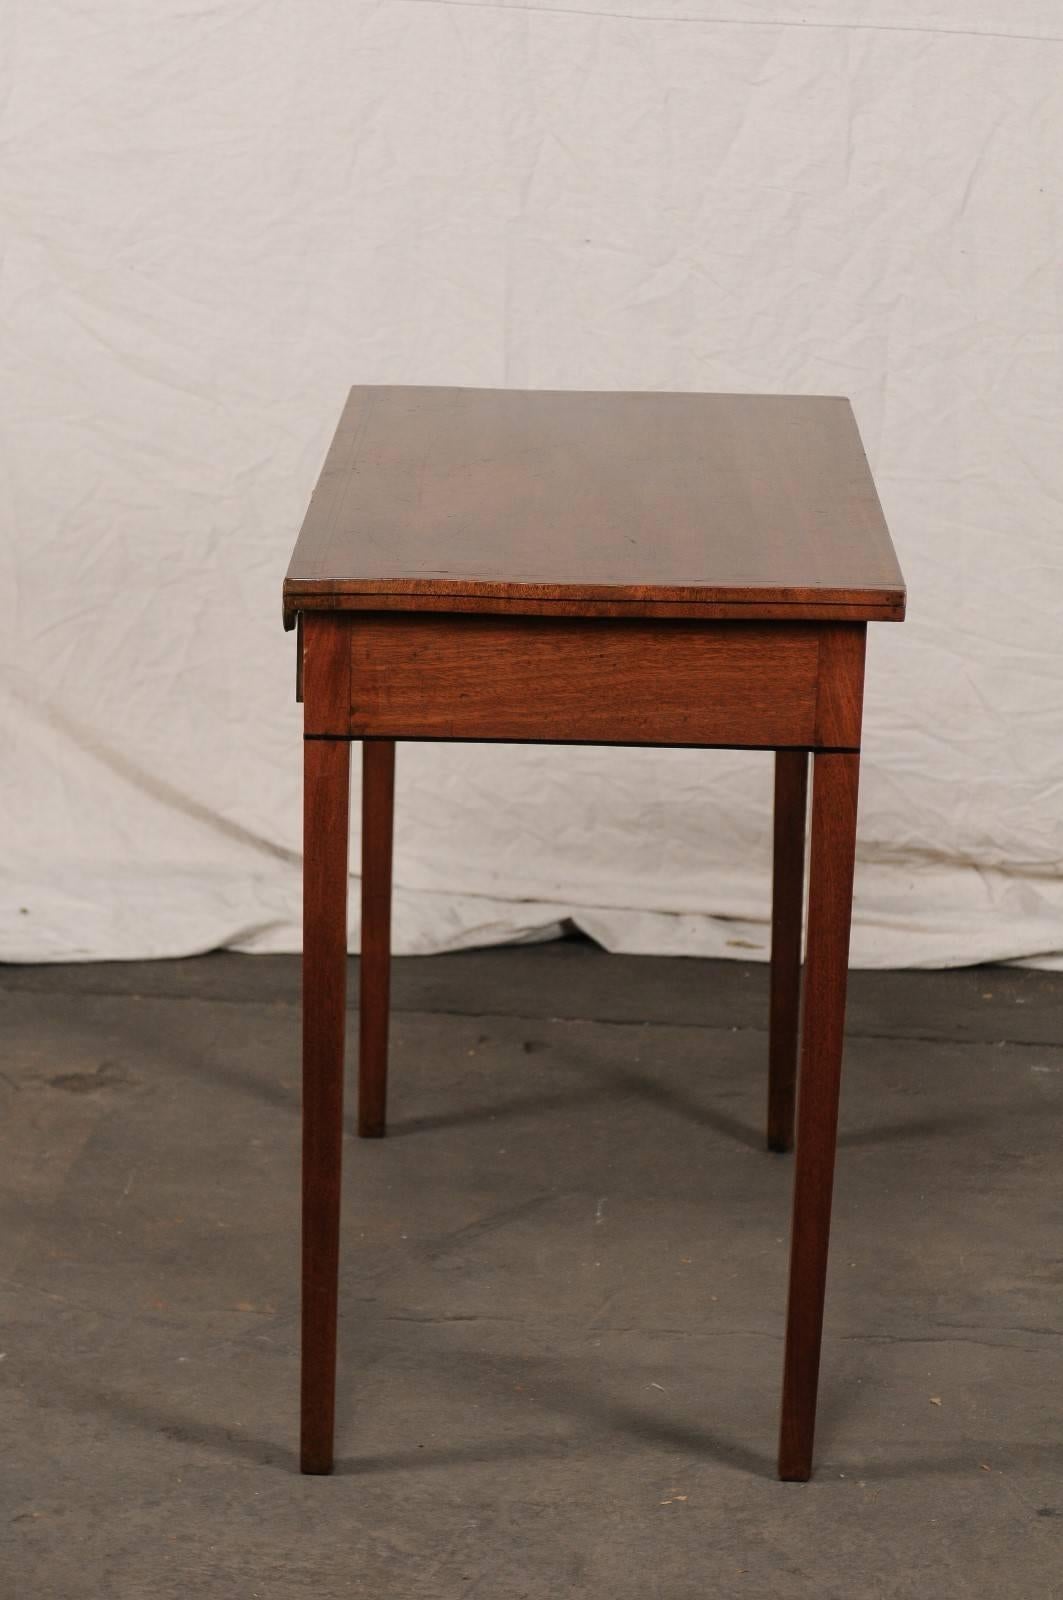 Early 19th Century English Regency Style Mahogany Table with Inlay, One Drawer 8